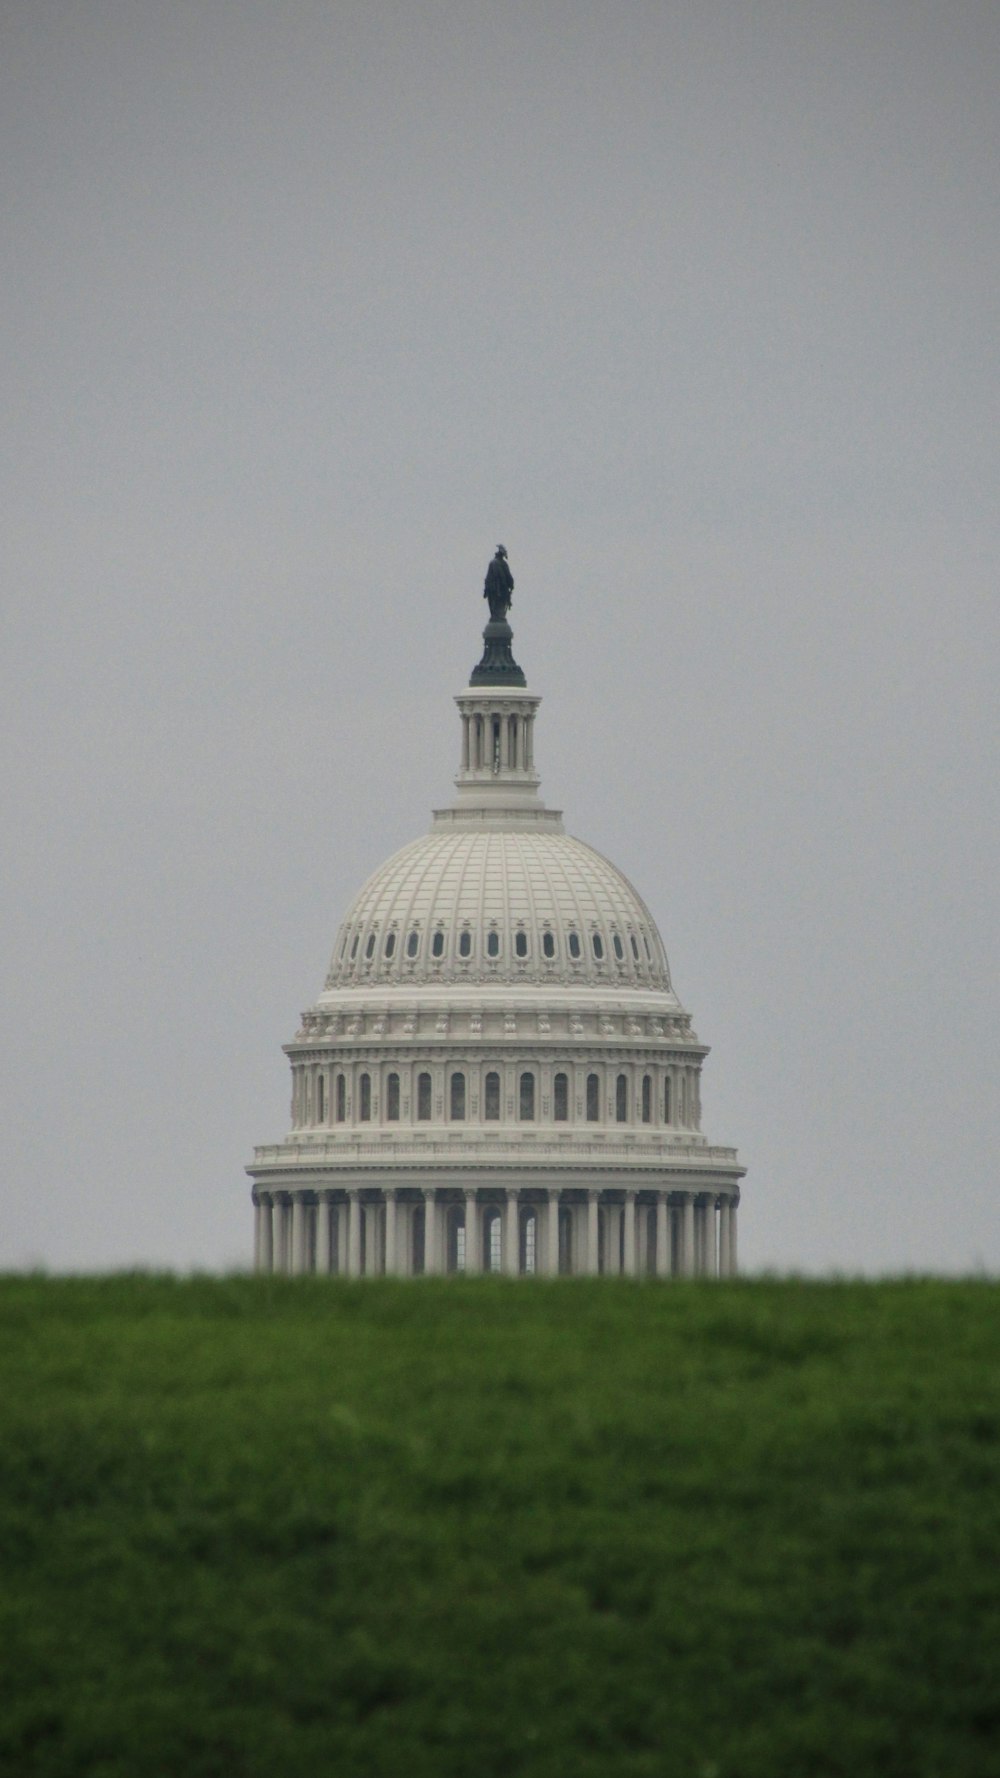 a view of the u s capitol building from across the field